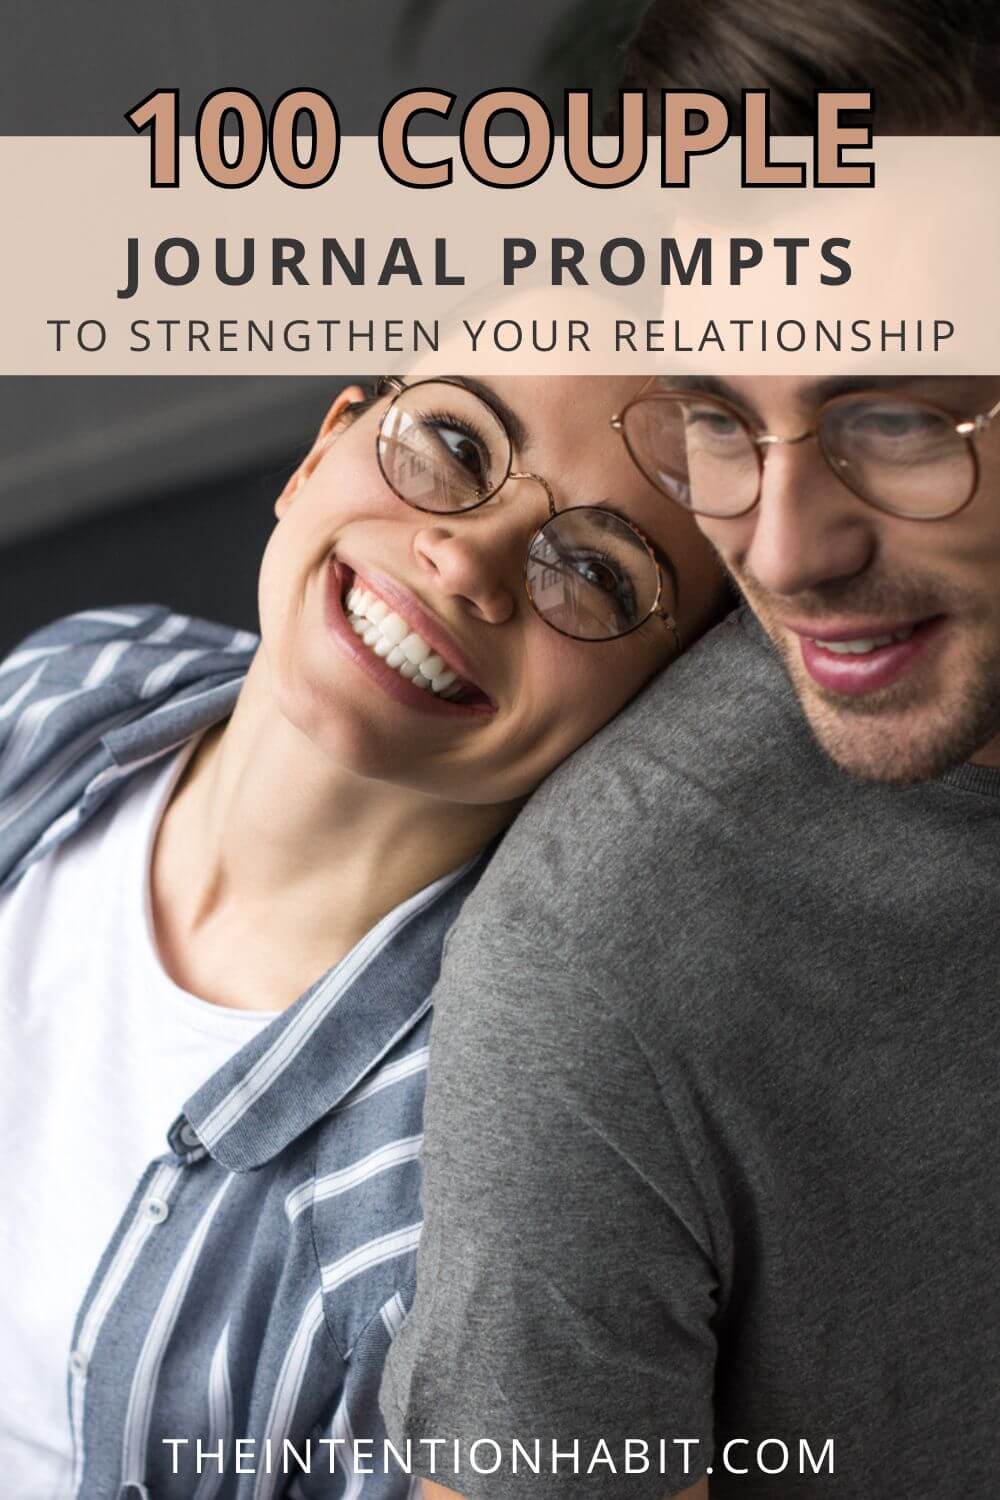 Guided Journal Printablecouple's Journal Prompts Relationship